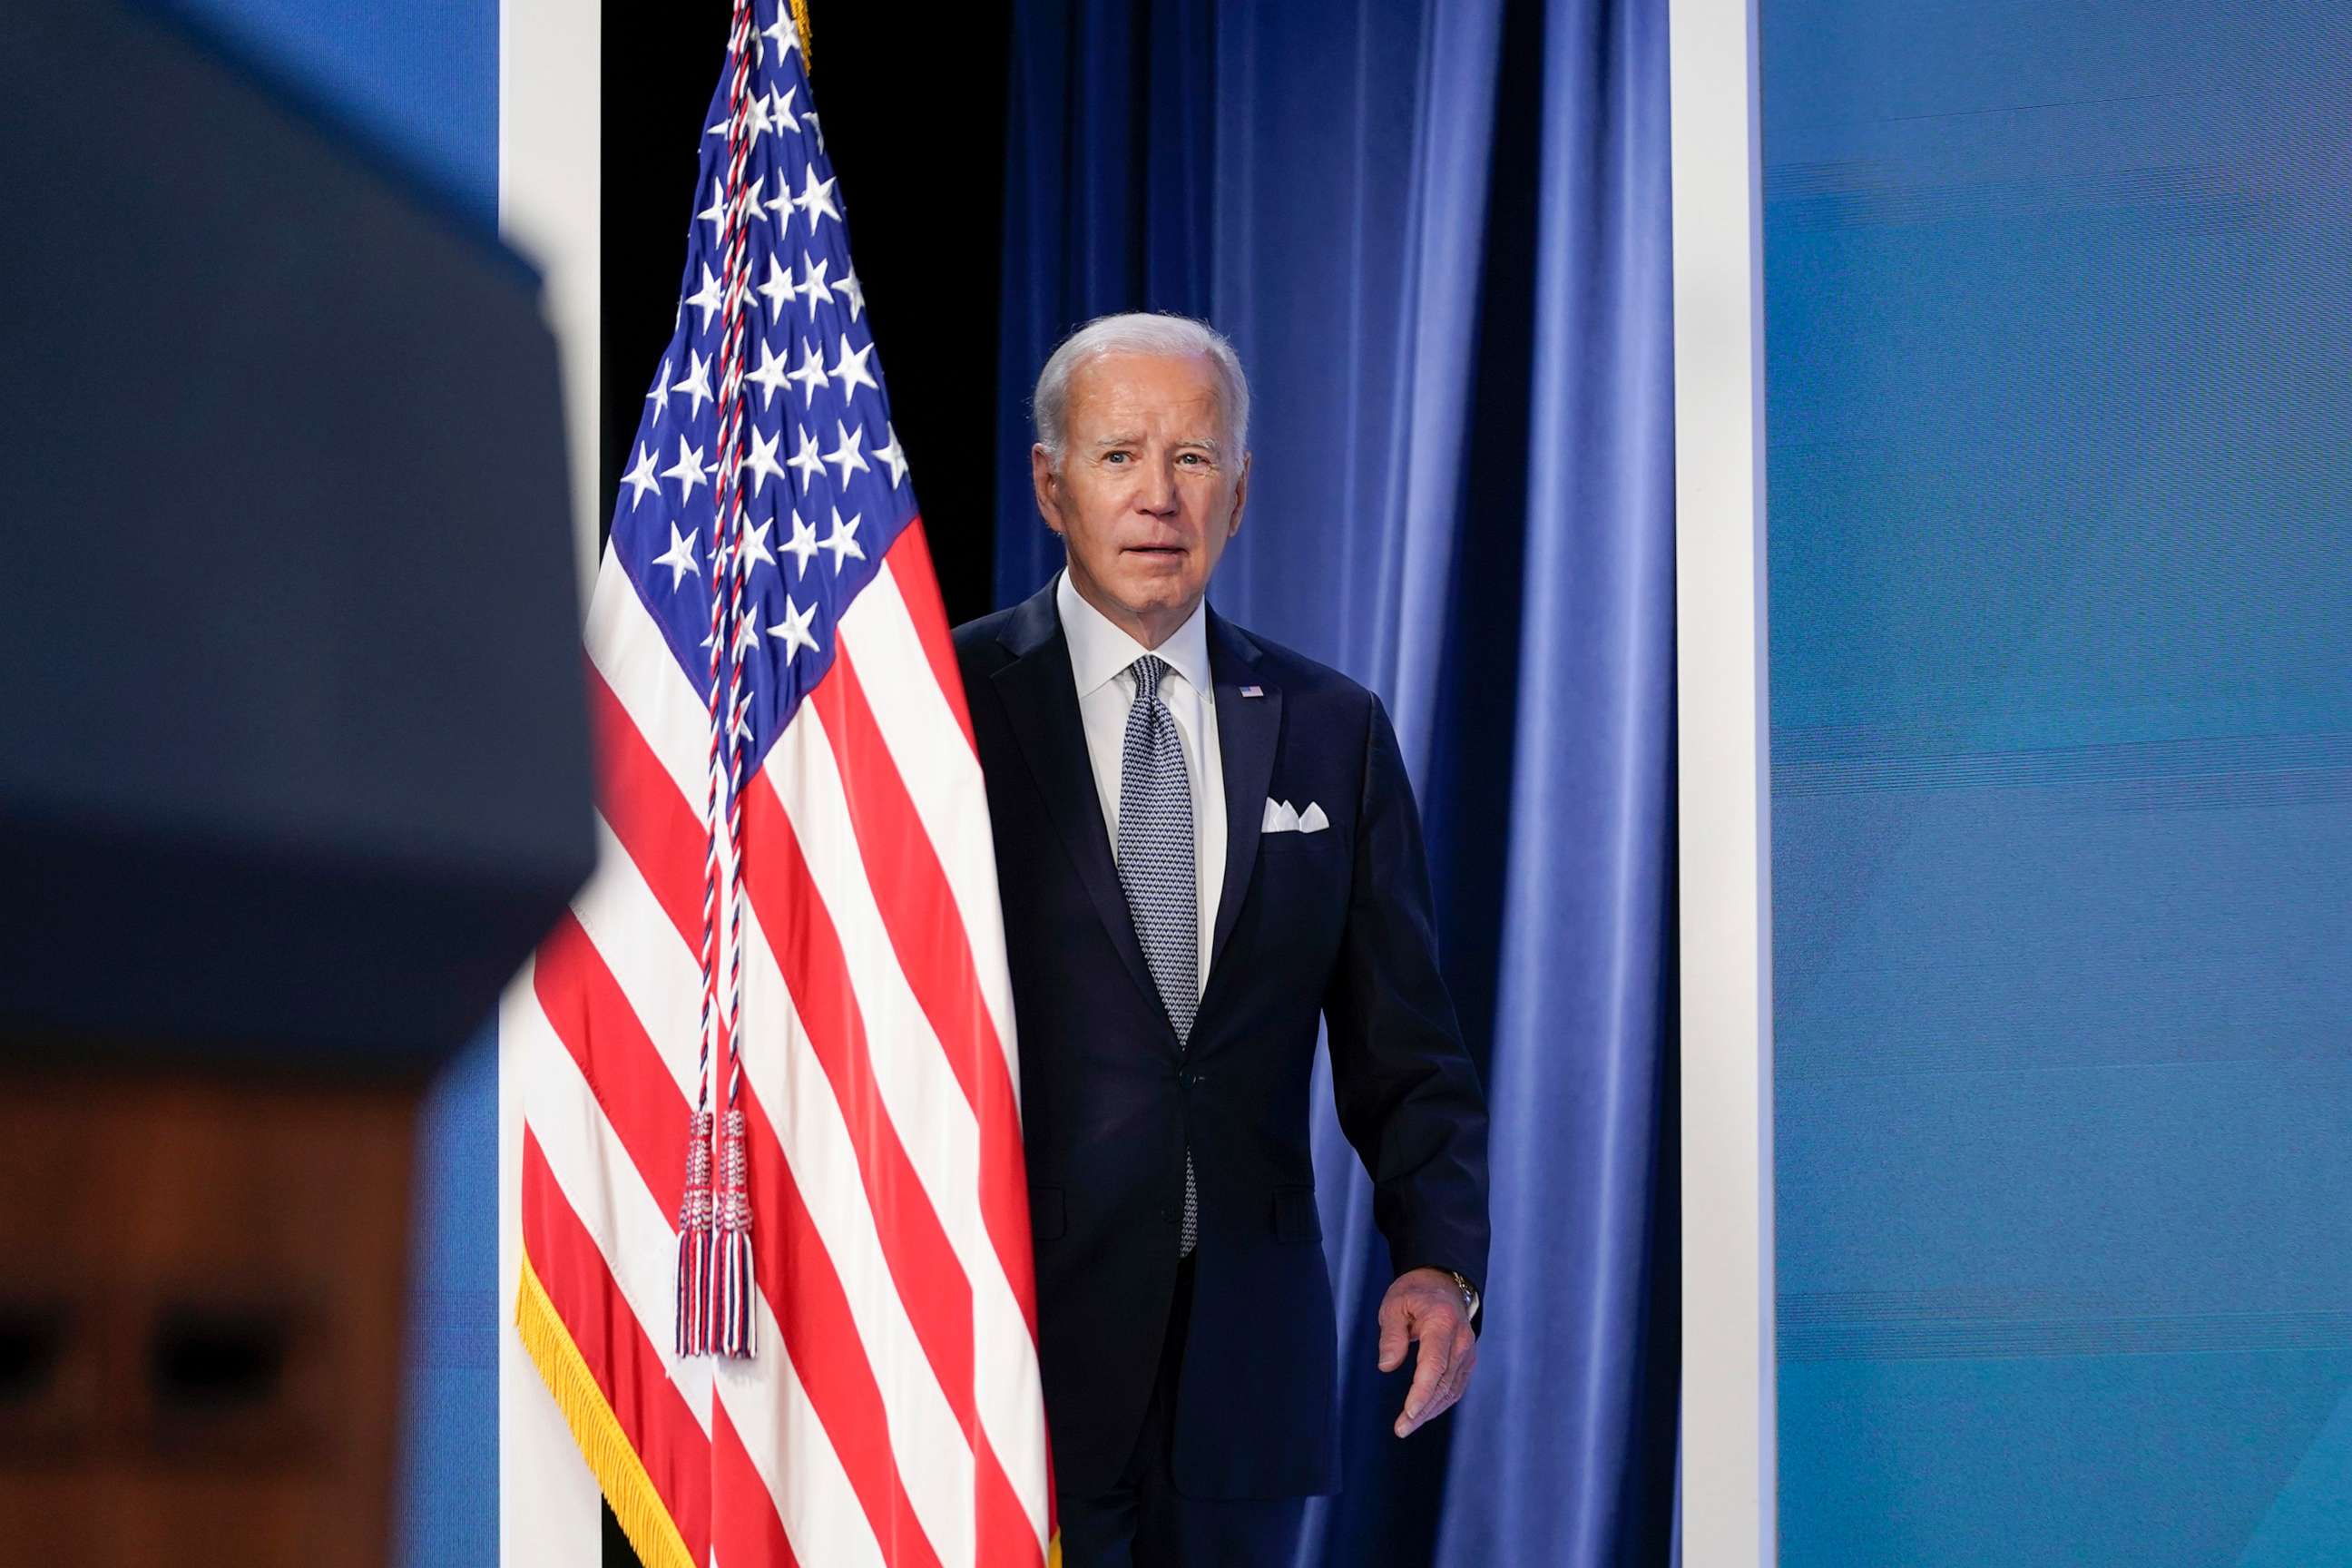 PHOTO: President Joe Biden arrives to speak about the economy in the Eisenhower Executive Office Building on the White House Campus, Jan. 12, 2023, in Washington.